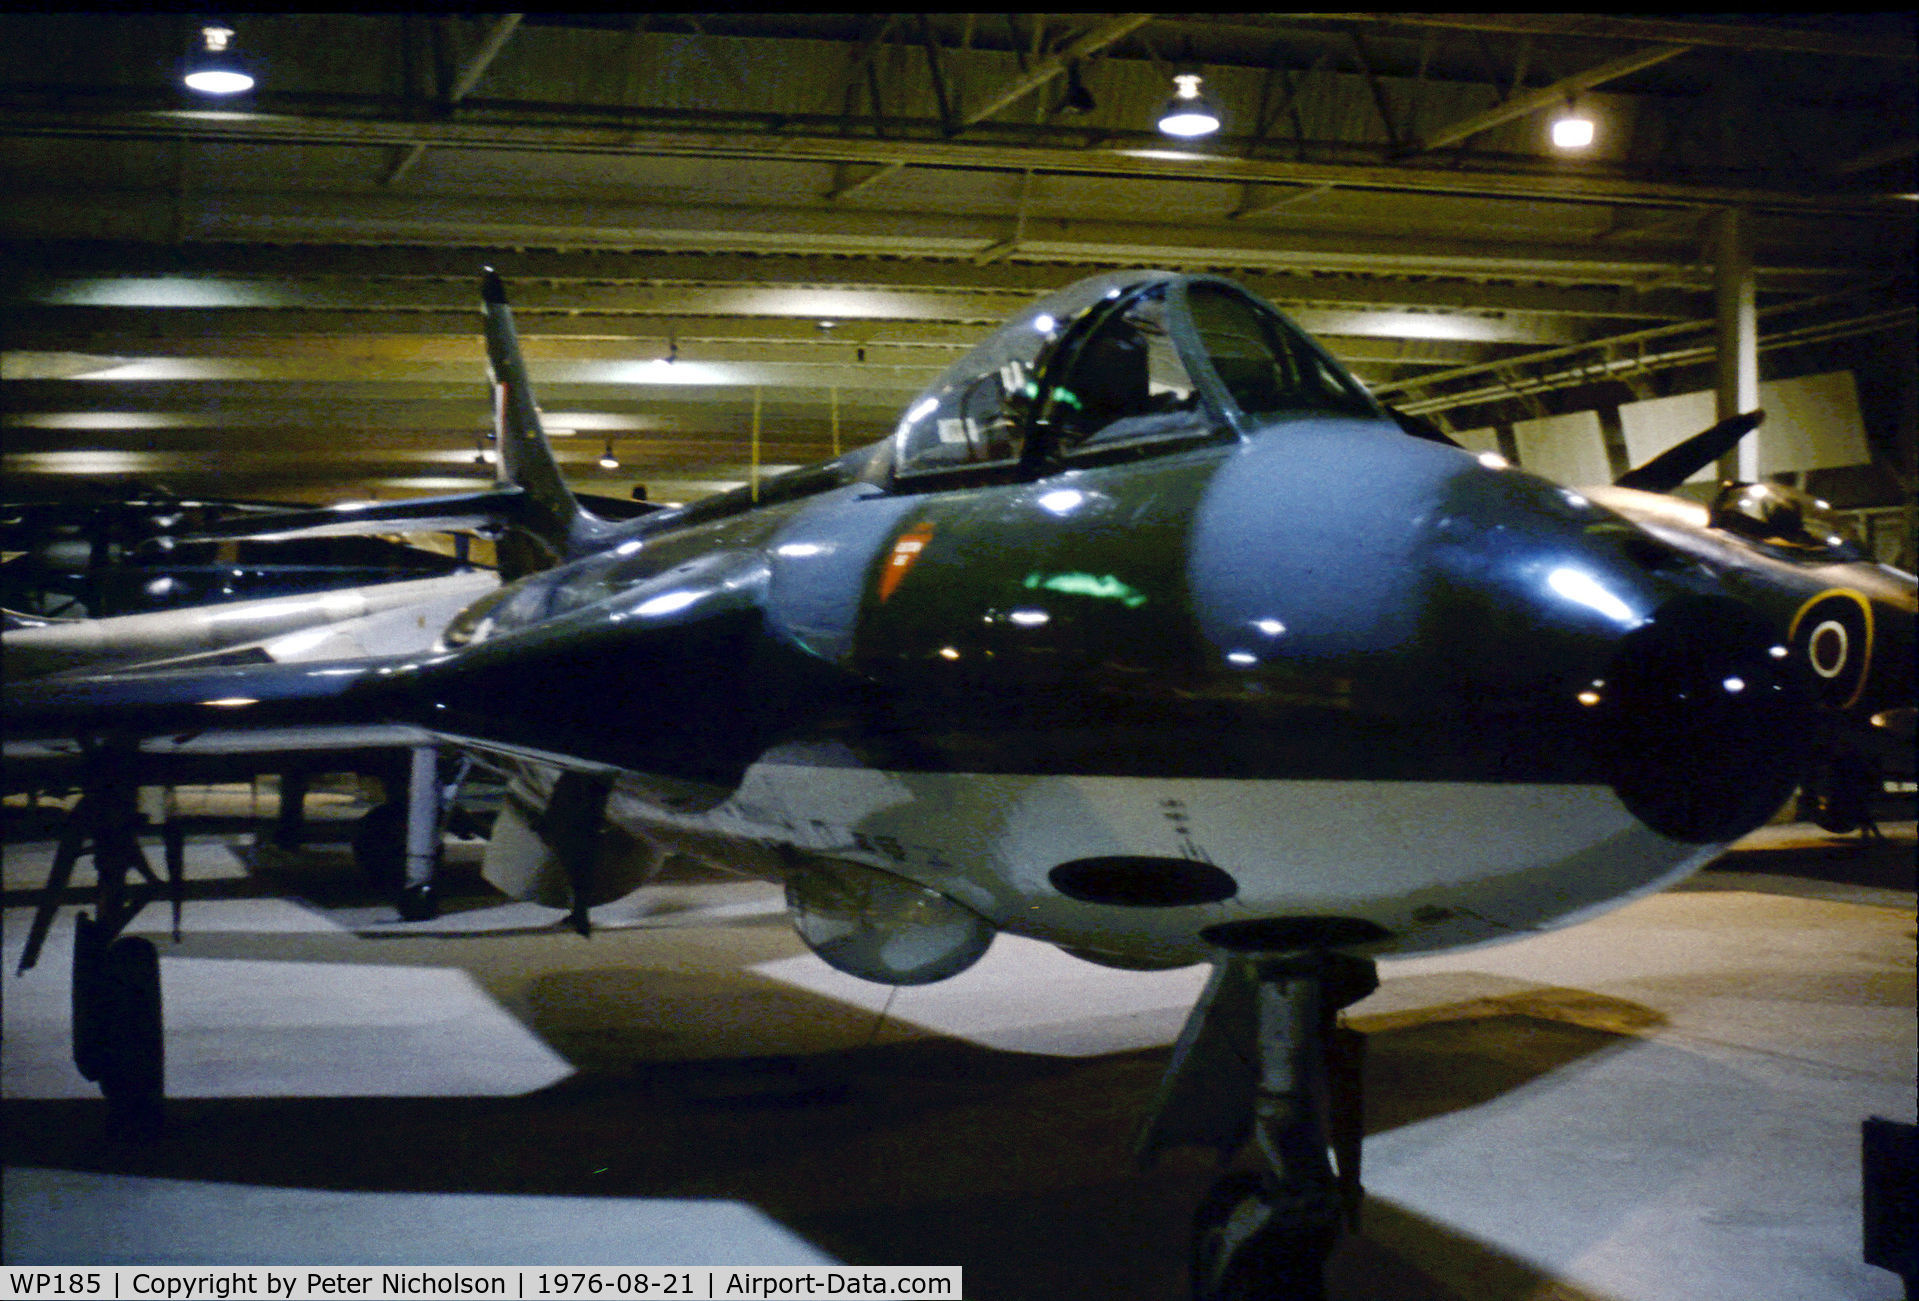 WP185, 1955 Hawker Hunter F.5 C/N S4/U/3036, Hunter F.5 on display at the Royal Air Force Museum at Hendon in August 1976.